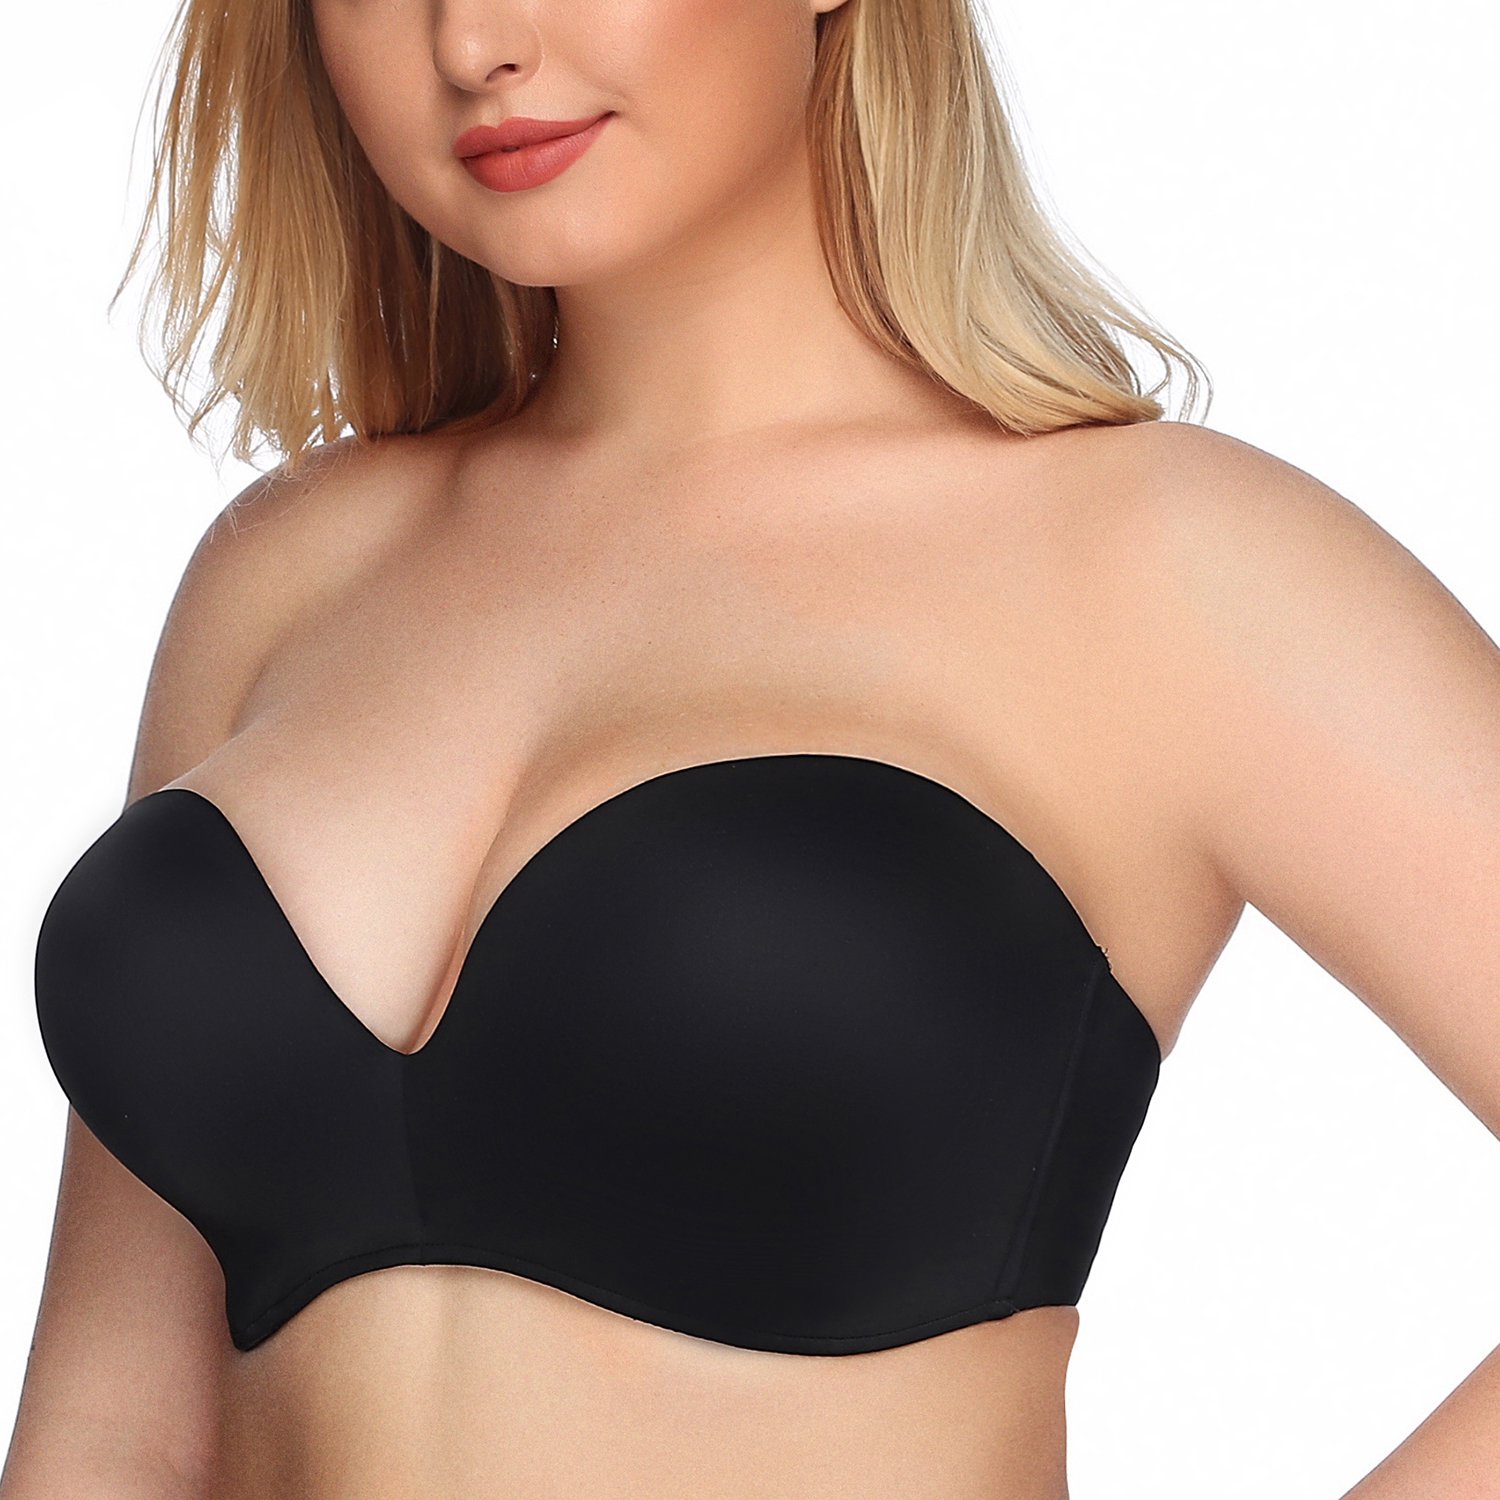 11 Best Push Up Bras You Should Buy With Price And Reviews 